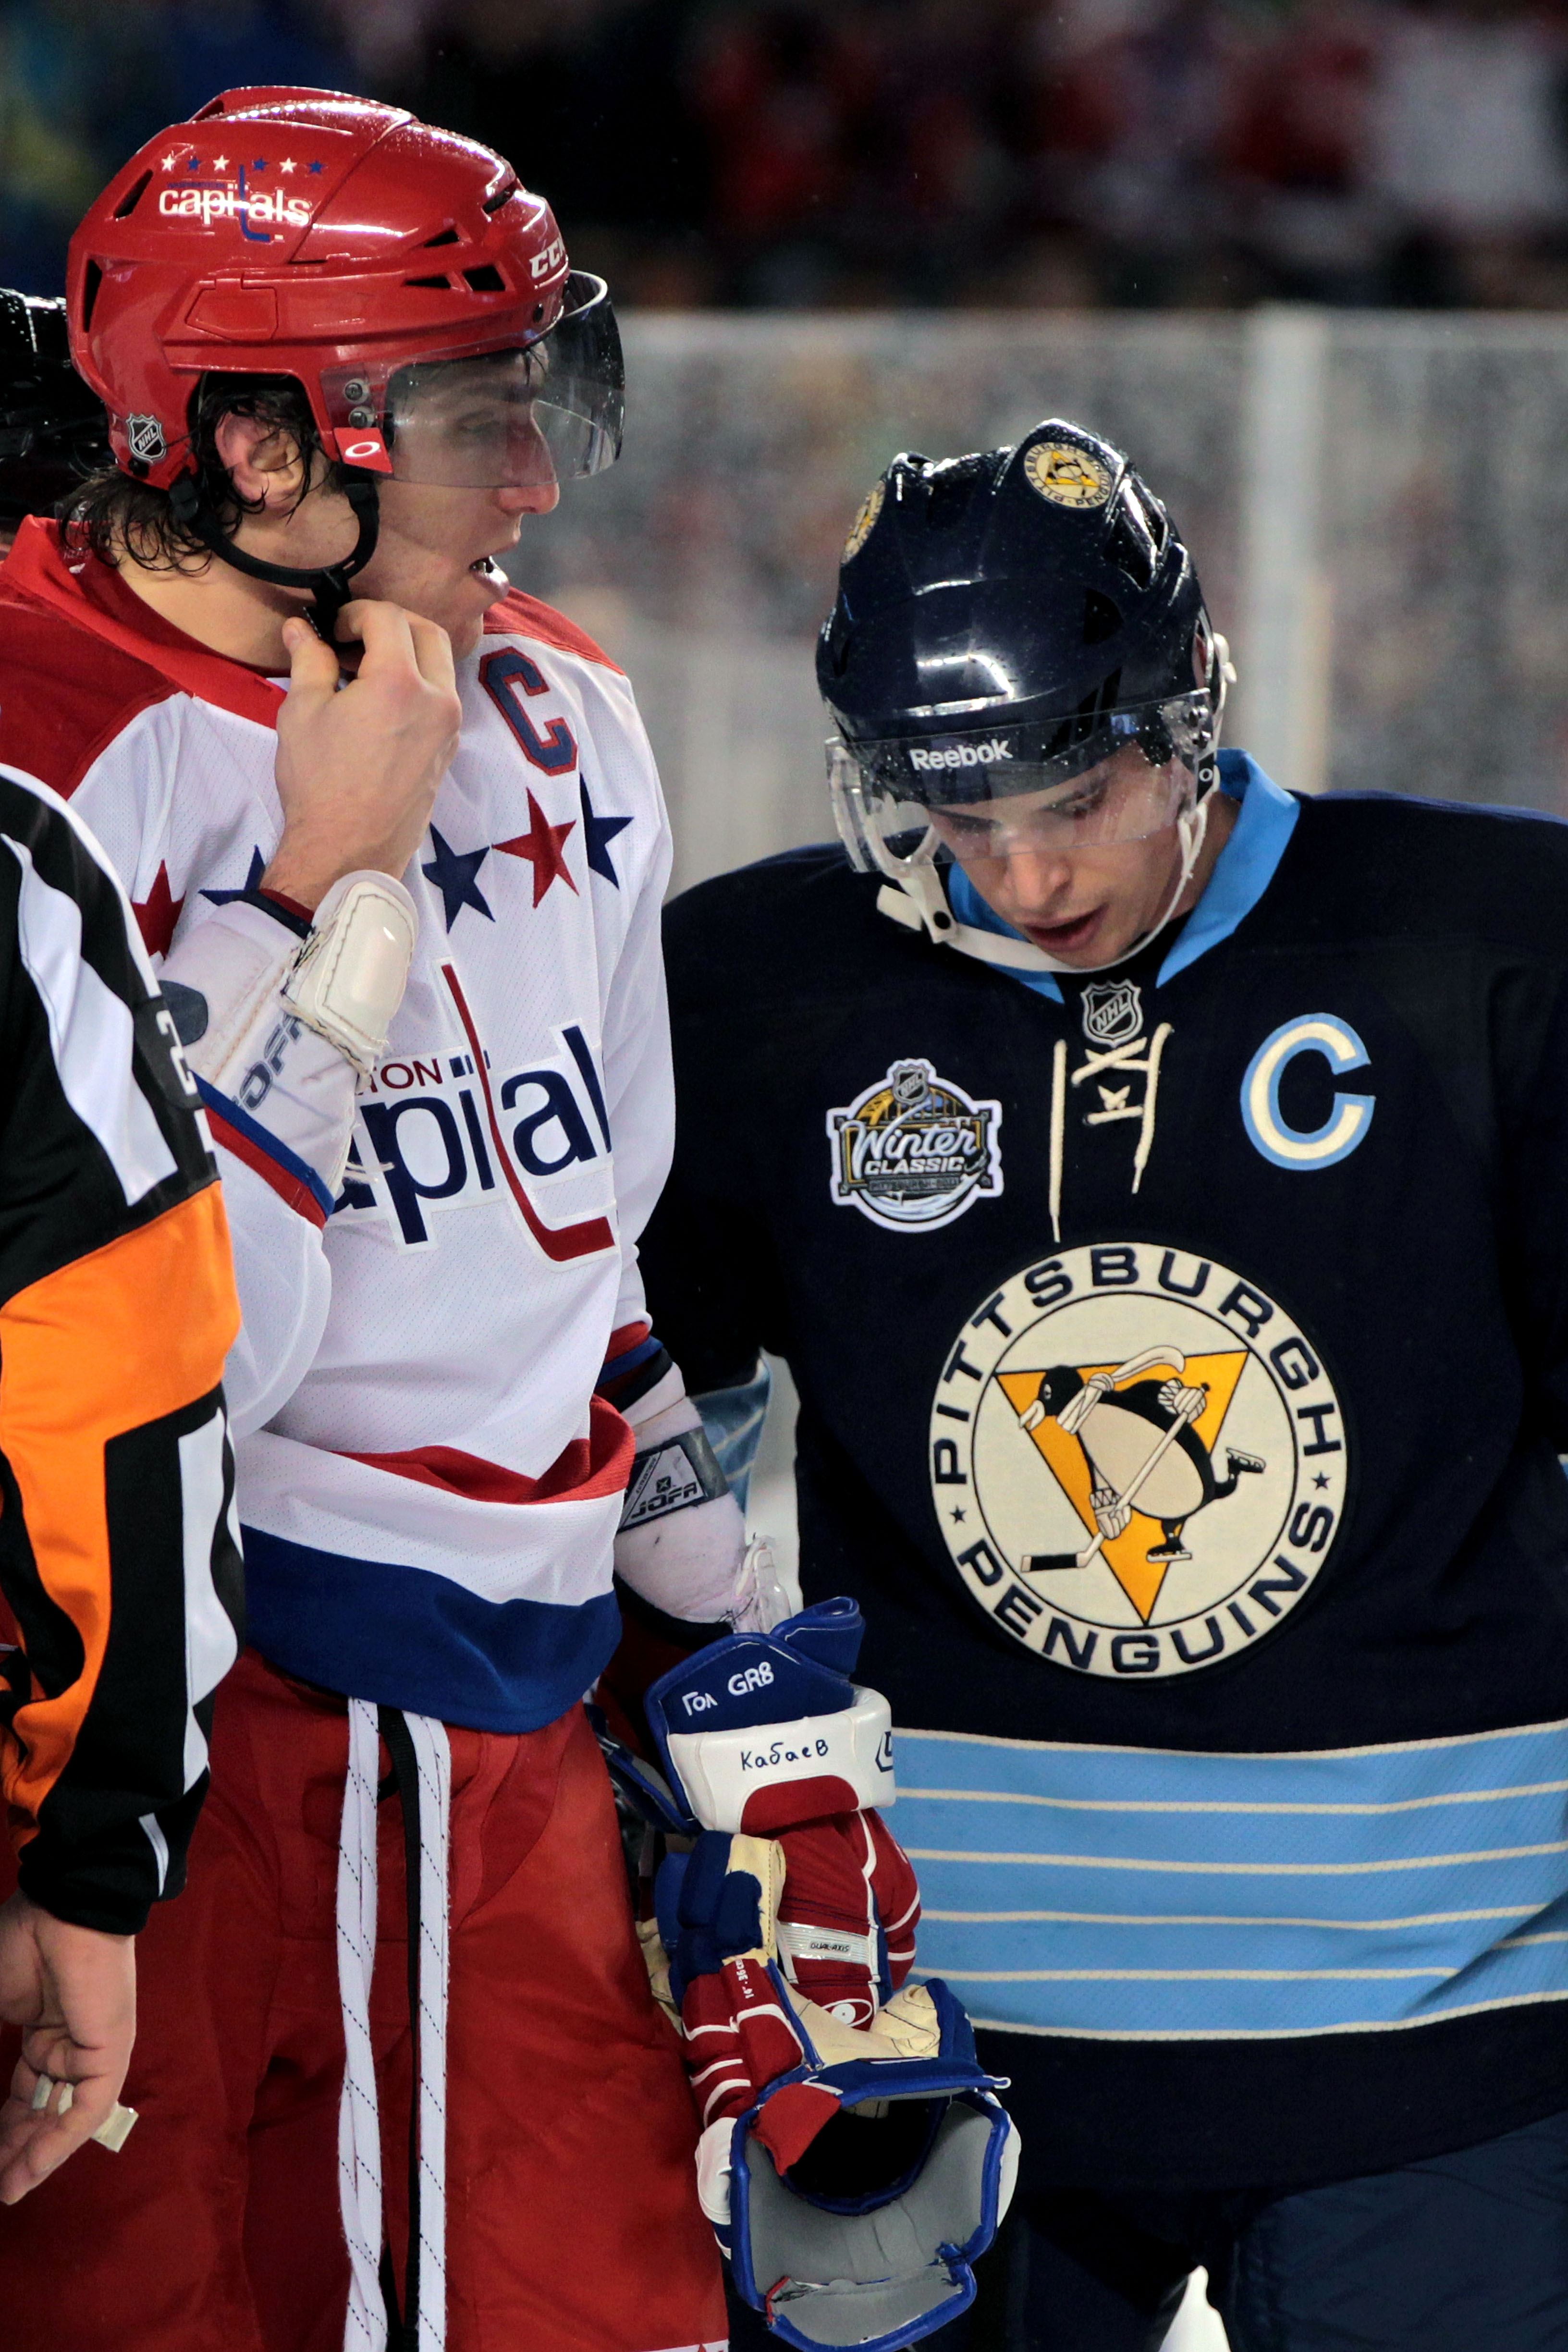 PITTSBURGH, PA - JANUARY 01:  Alex Ovechkin #8 of the Washington Capitals and Sidney Crosby #81 of the Pittsburgh Penguins are seen during the 2011 NHL Bridgestone Winter Classic at Heinz Field on January 1, 2011 in Pittsburgh, Pennsylvania. Washington wo